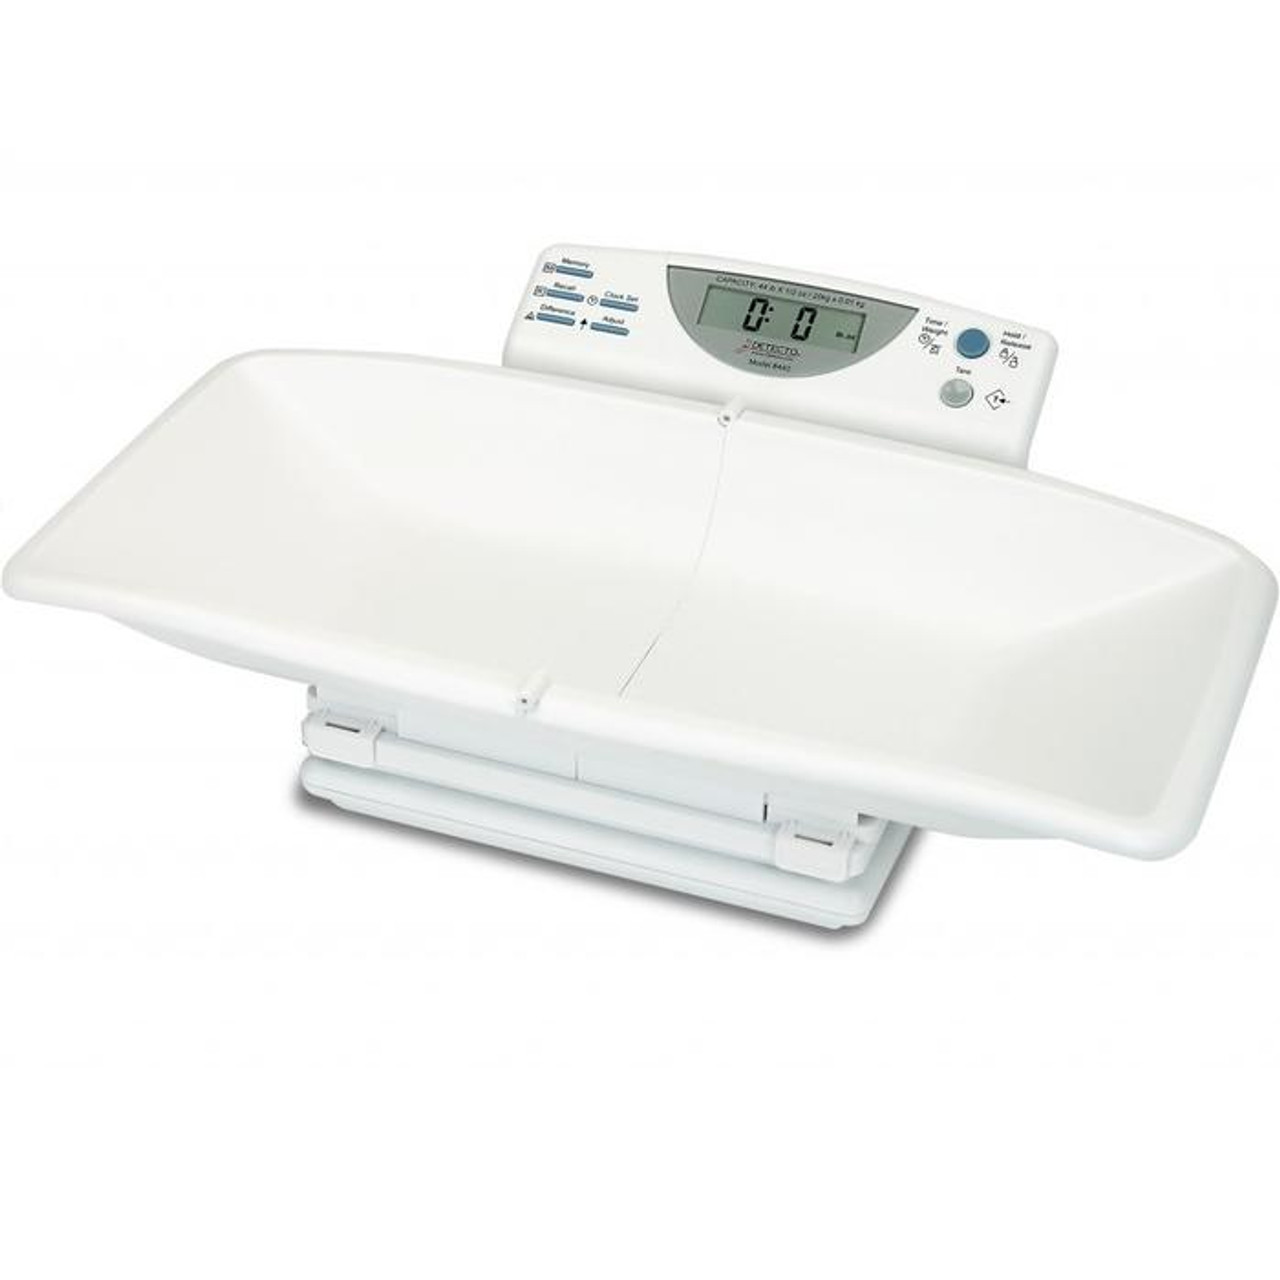 https://store.cevimed.com/images/stencil/1280x1280/products/123014/127421/Detecto_Digital_Portable_Baby_Scale__88618__83440.1633715564.jpg?c=1